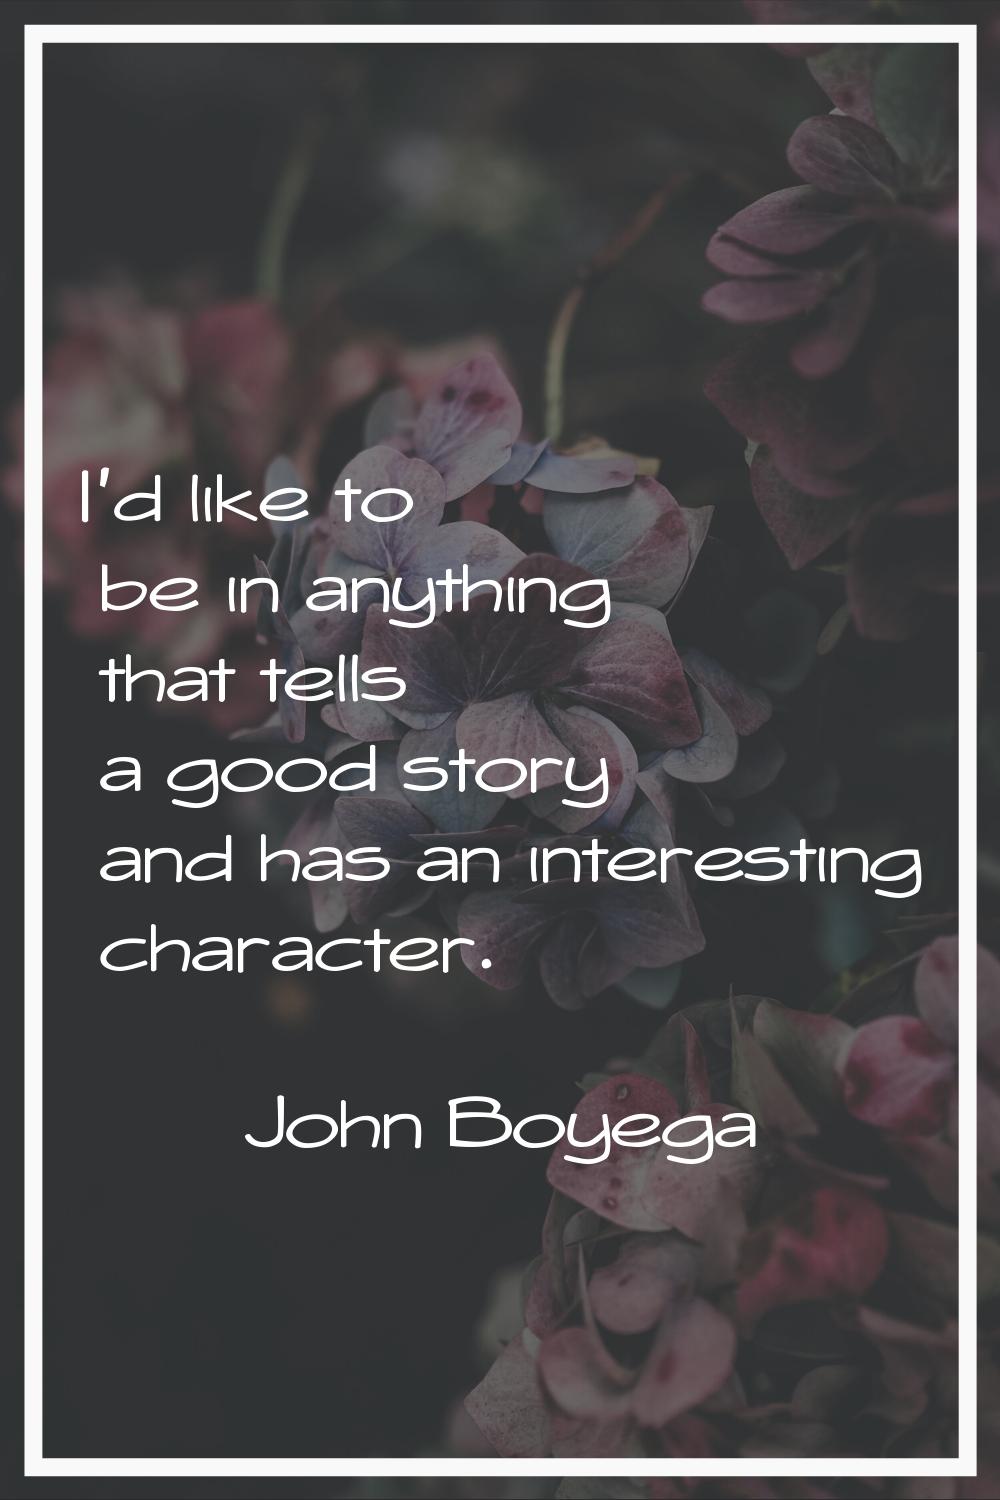 I'd like to be in anything that tells a good story and has an interesting character.